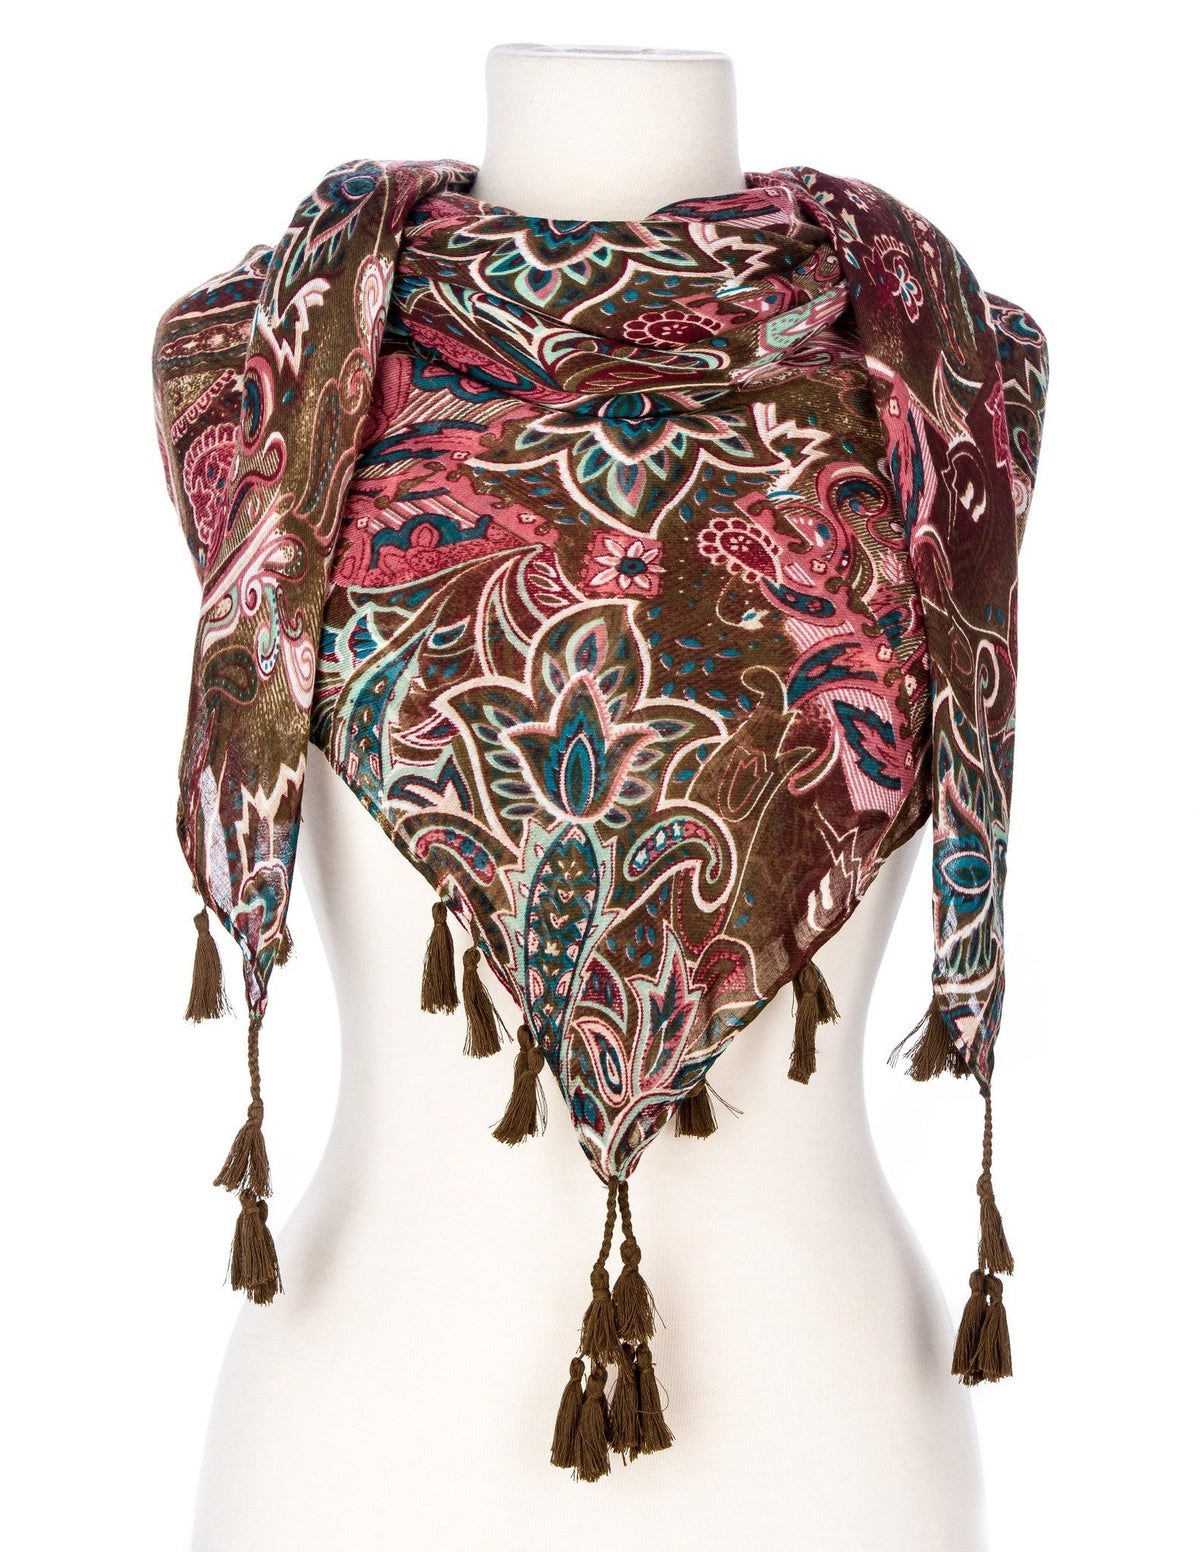 Peacock Flair Spring Scarf - Burgundy/Olive/Green